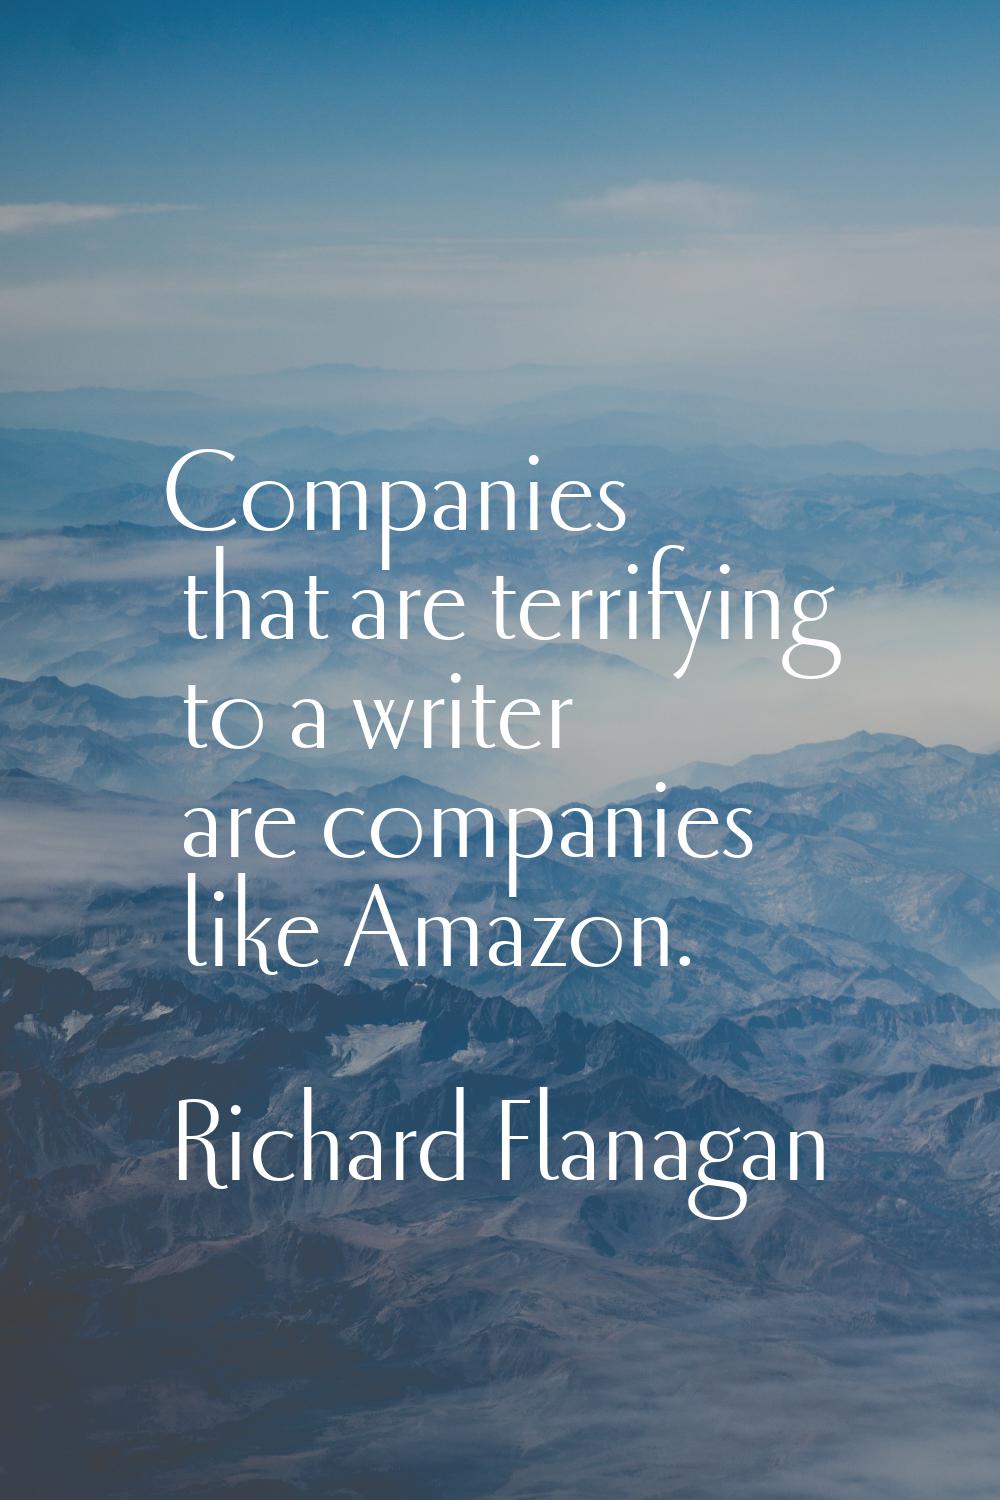 Companies that are terrifying to a writer are companies like Amazon.